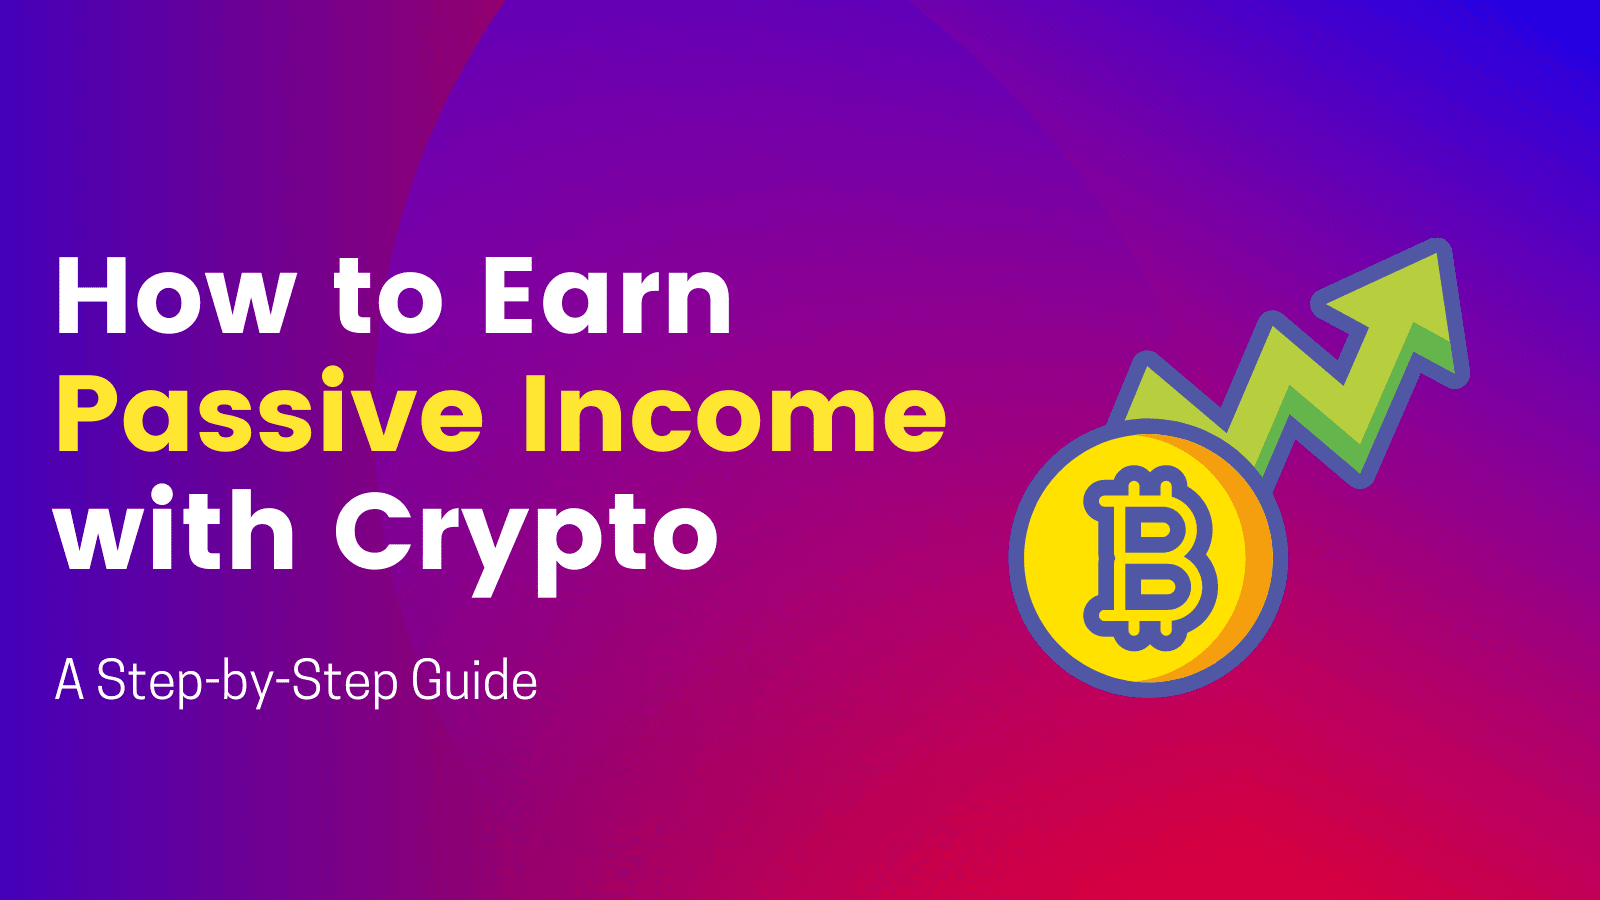 How to earn passive income with crypto